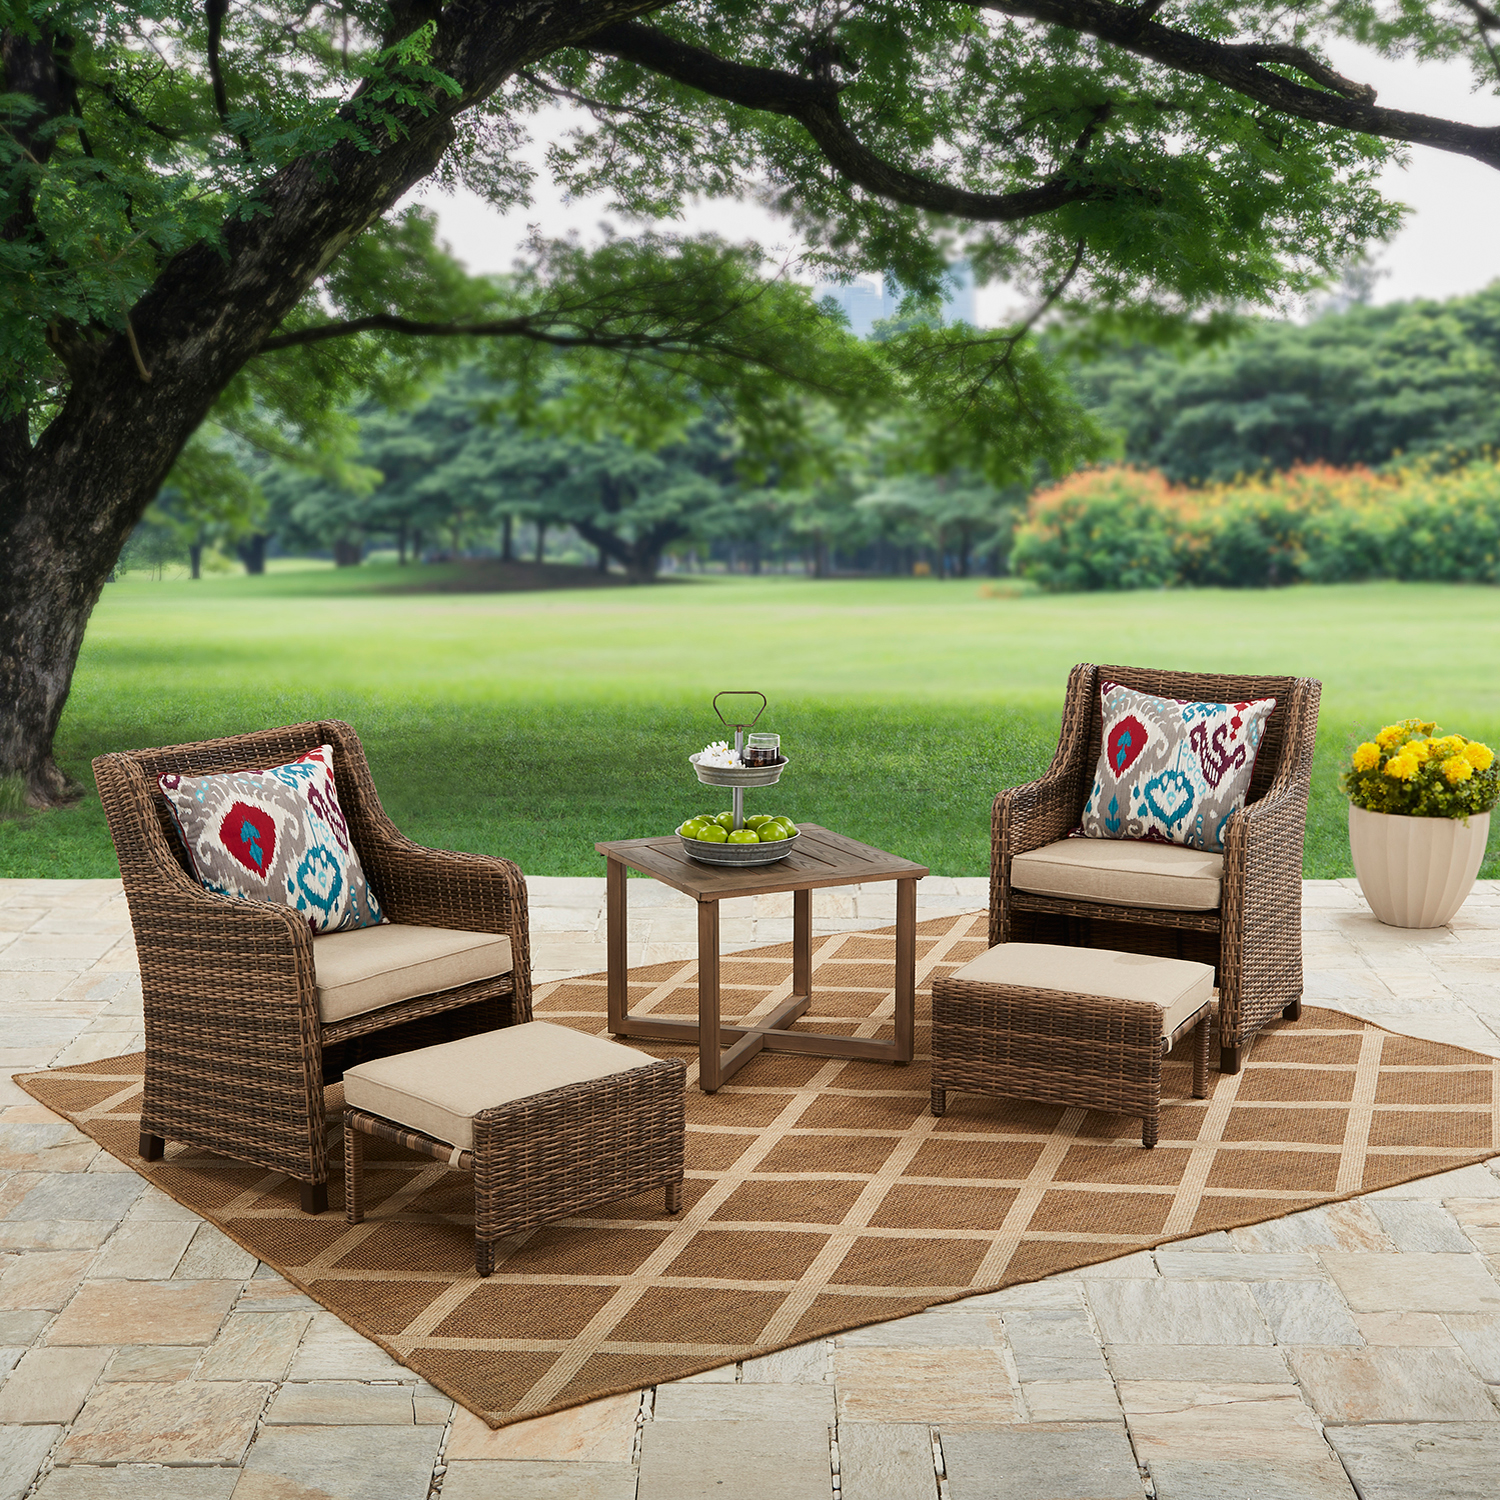 Better Homes & Garden Hawthorne Park 5 Piece Outdoor Chat Set with Beige Cushions - image 1 of 11